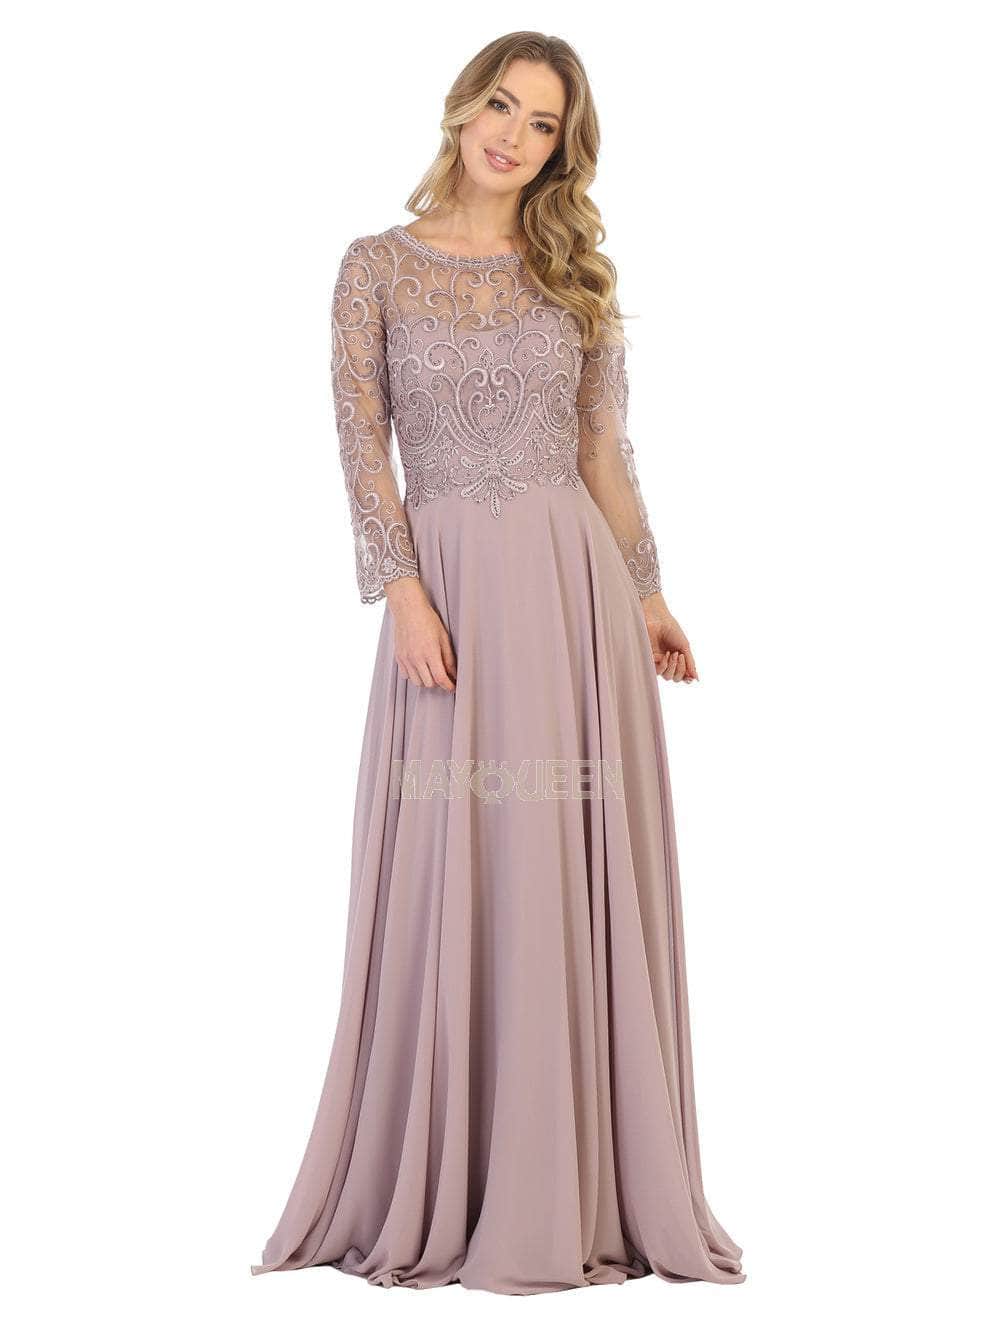 May Queen - MQ1706 Embroidered Illusion Jewel A-Line Dress Mother of the Bride Dresses M / Mauve